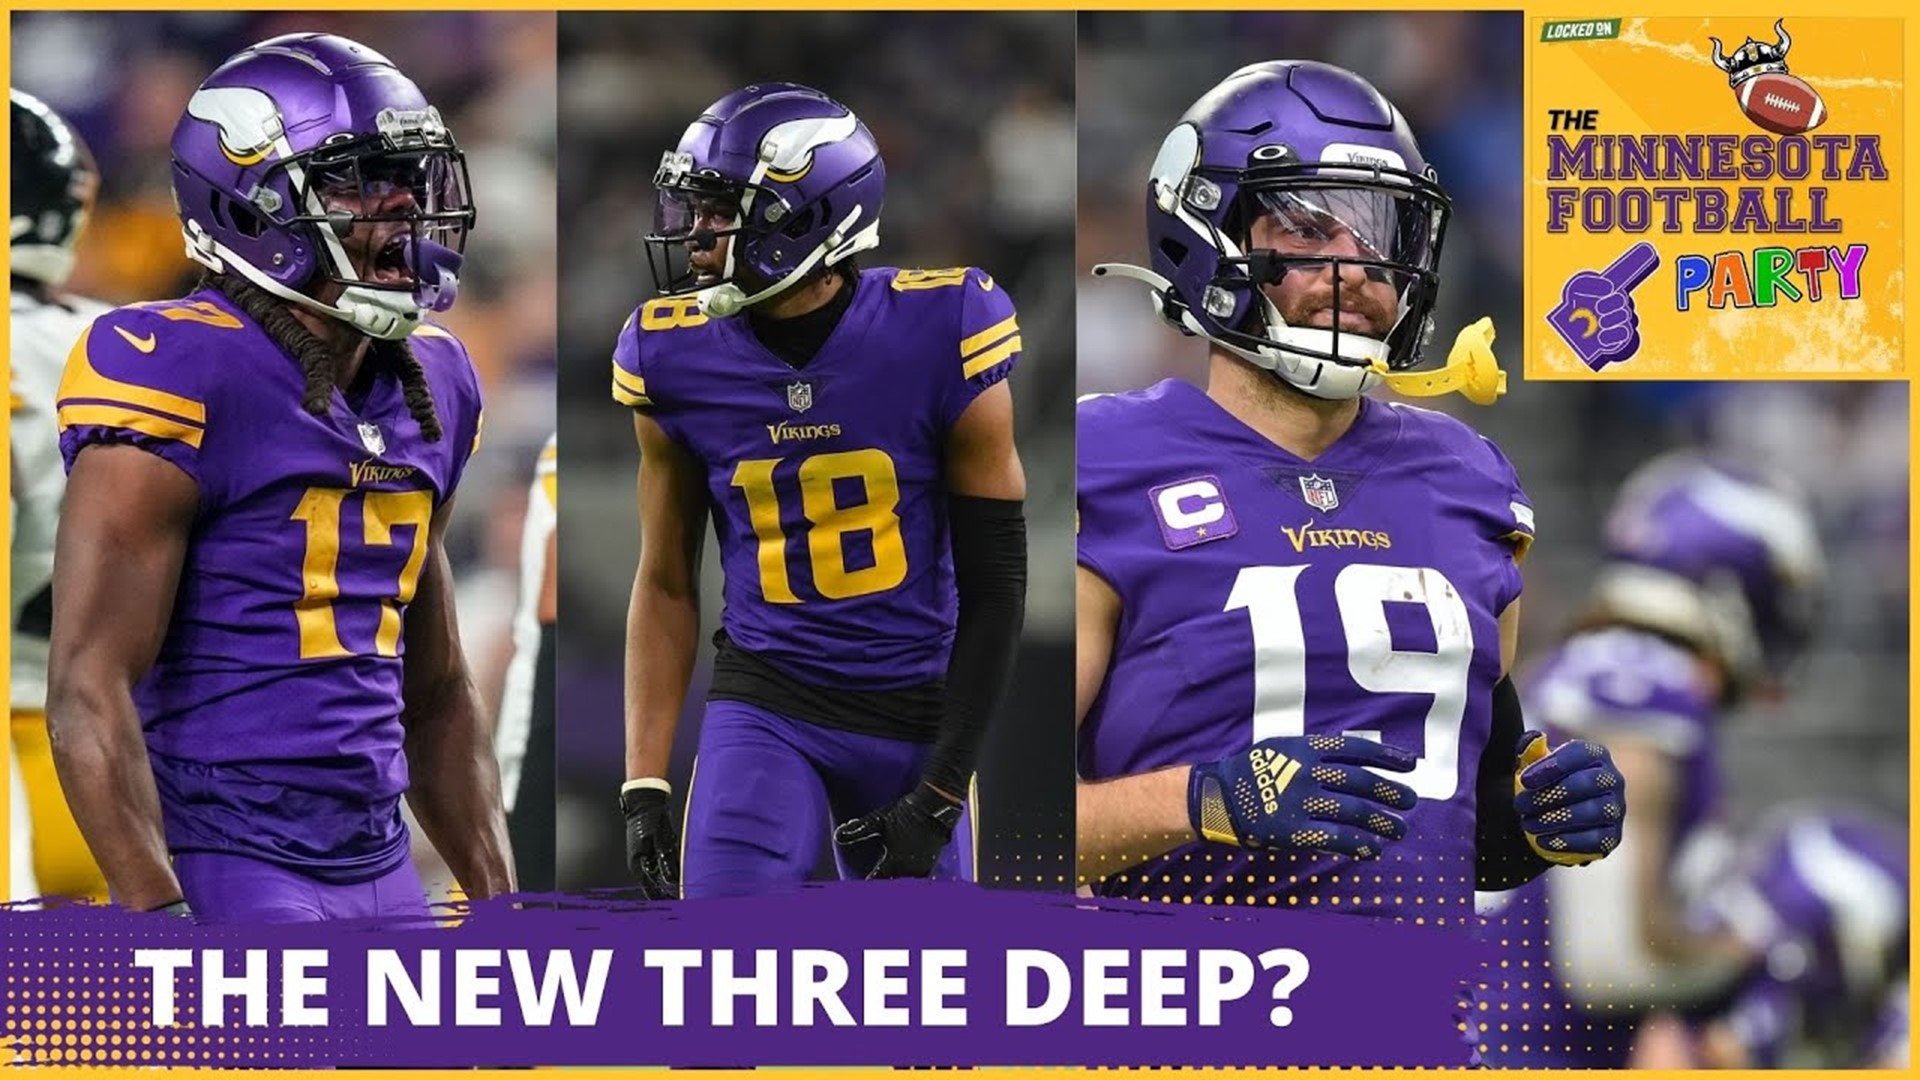 Randy Moss, Cris Carter and Jake Reed were a mythic trio for the Vikings in '98, but can Justin Jefferson, Adam Thielen and K.J. Osborn have the same type of impact?